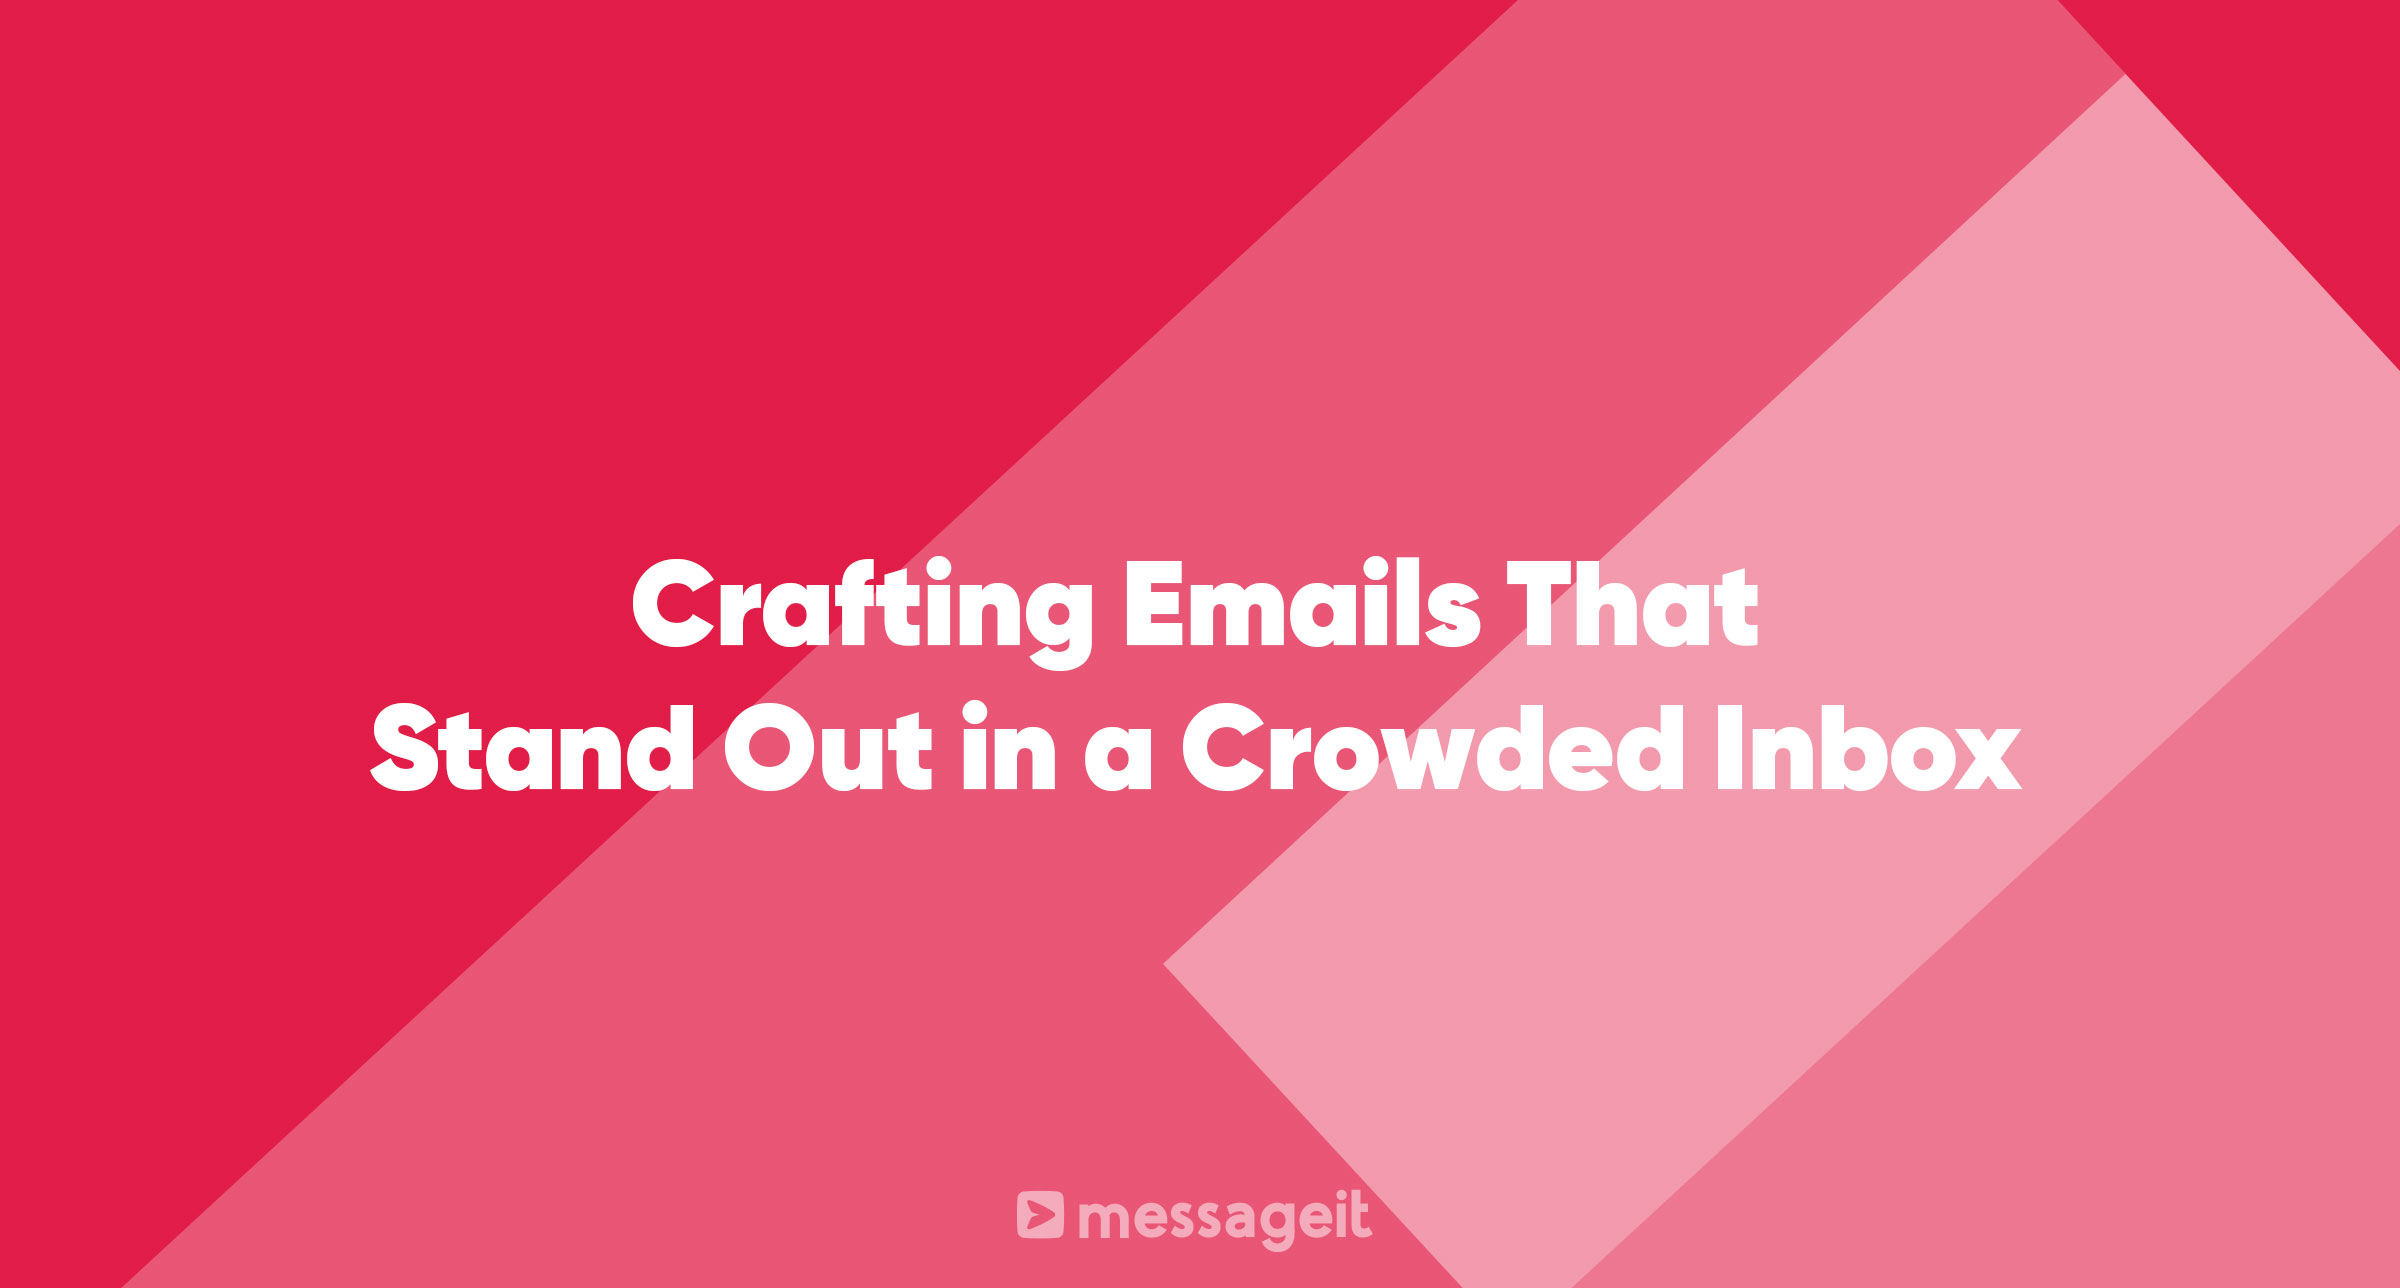 Article | Crafting Emails That Stand Out in a Crowded Inbox